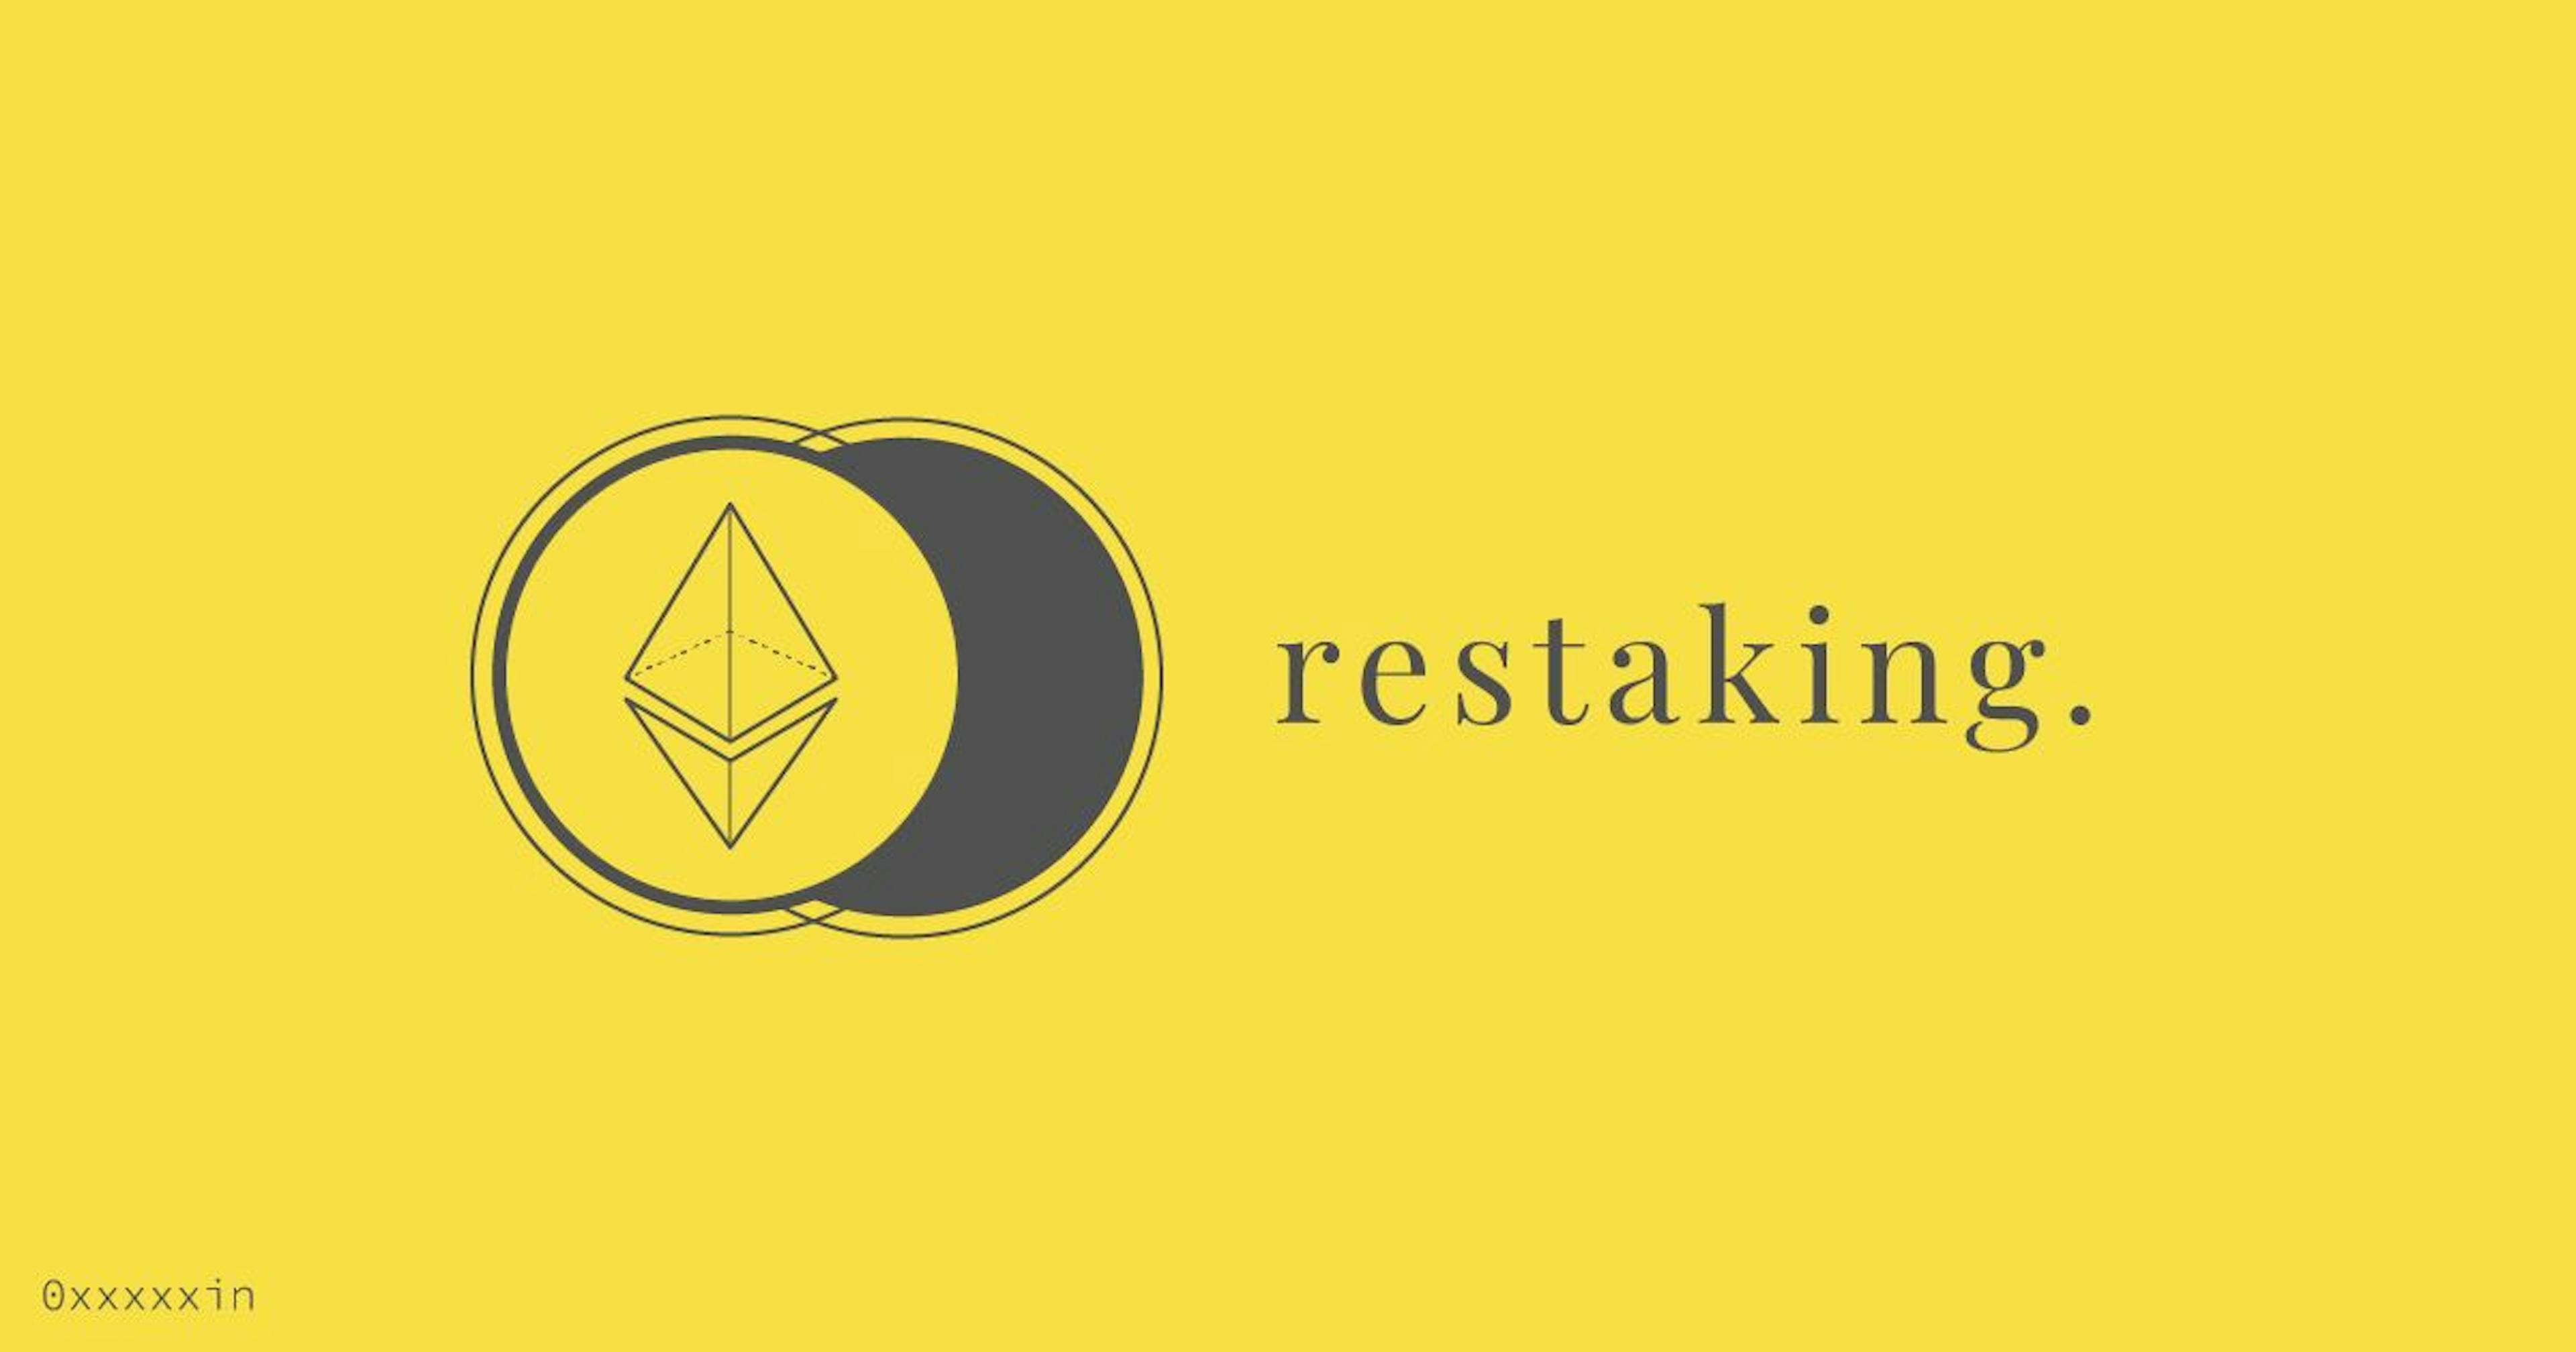 featured image - After Liquid Staking, What's Next? Restaking